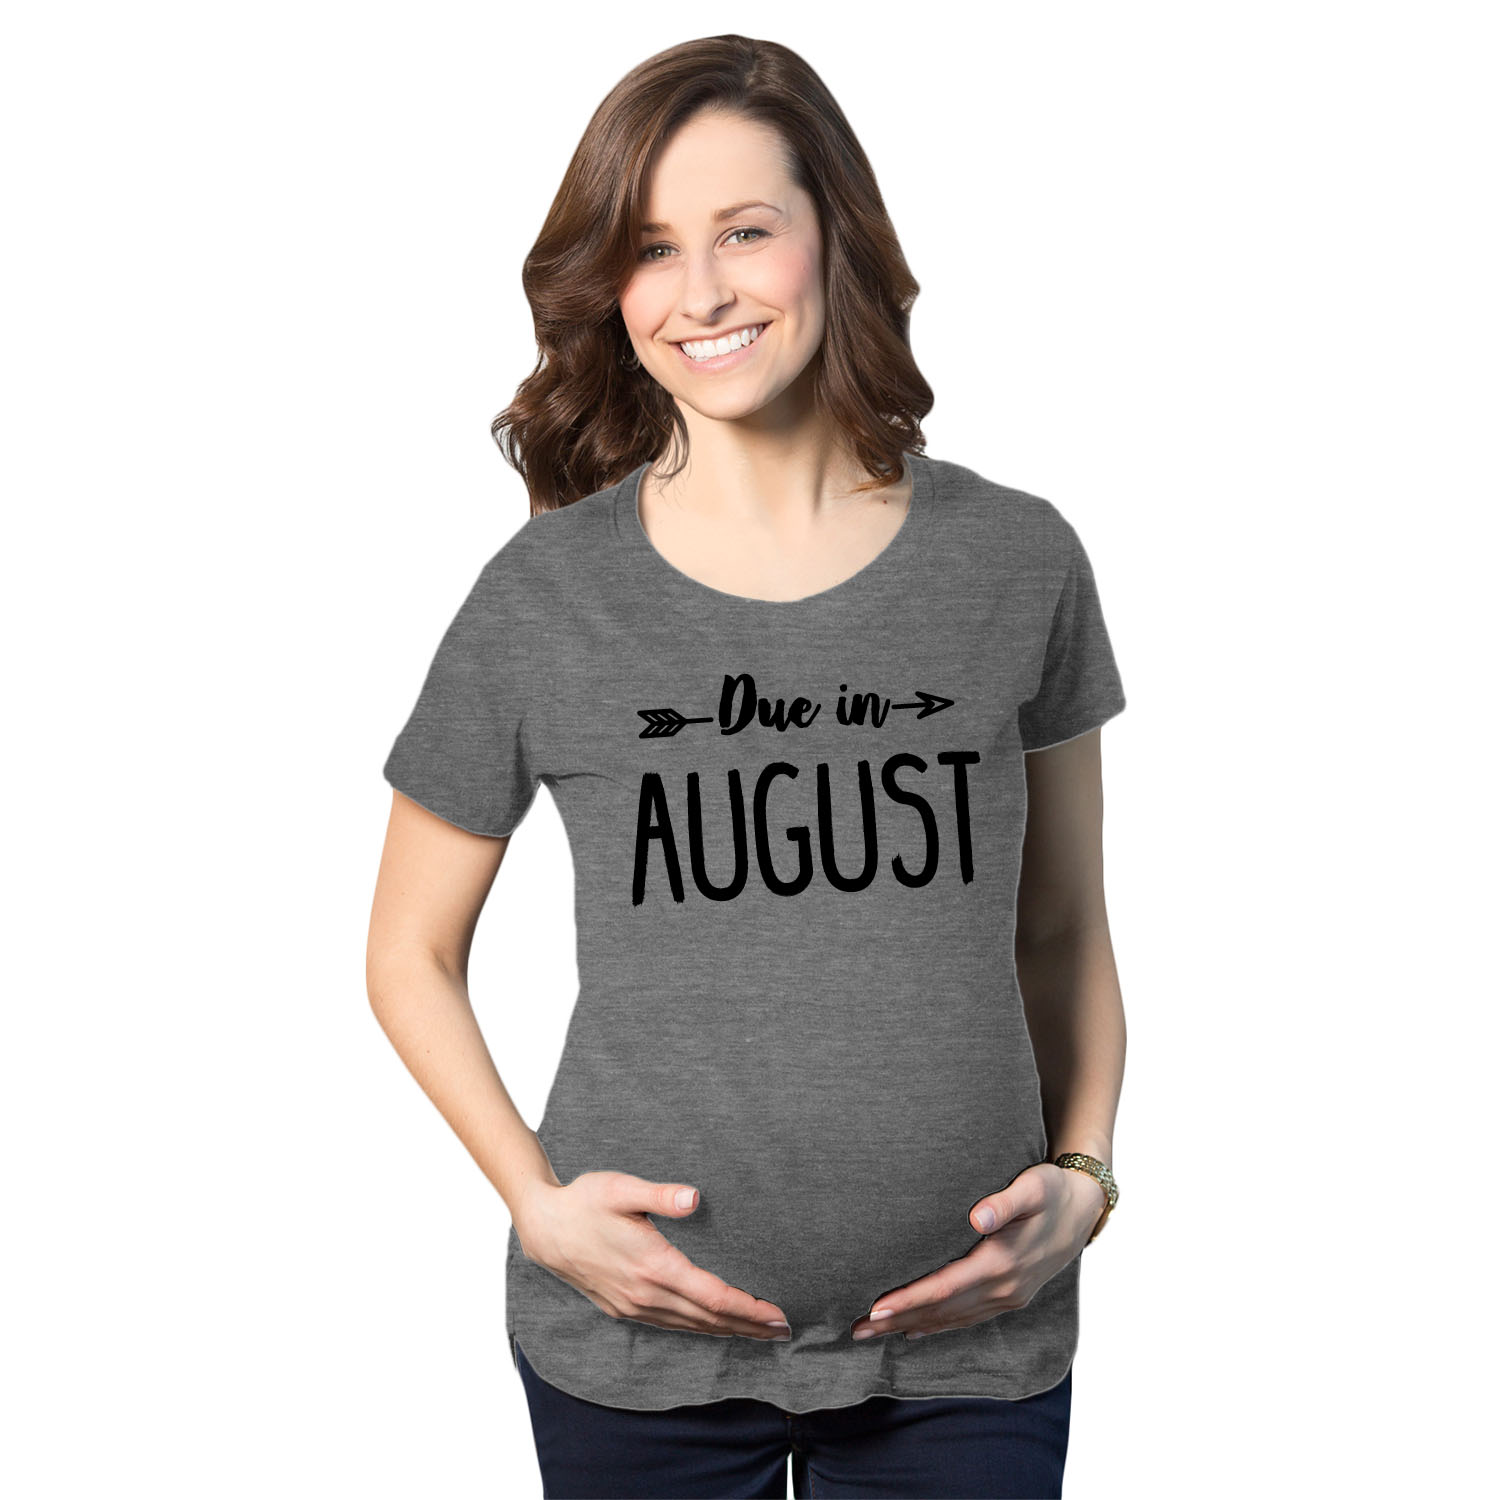 Maternity Due In August Funny T shirts Pregnant Shirts Announce Pregnancy Month Shirt - image 1 of 9